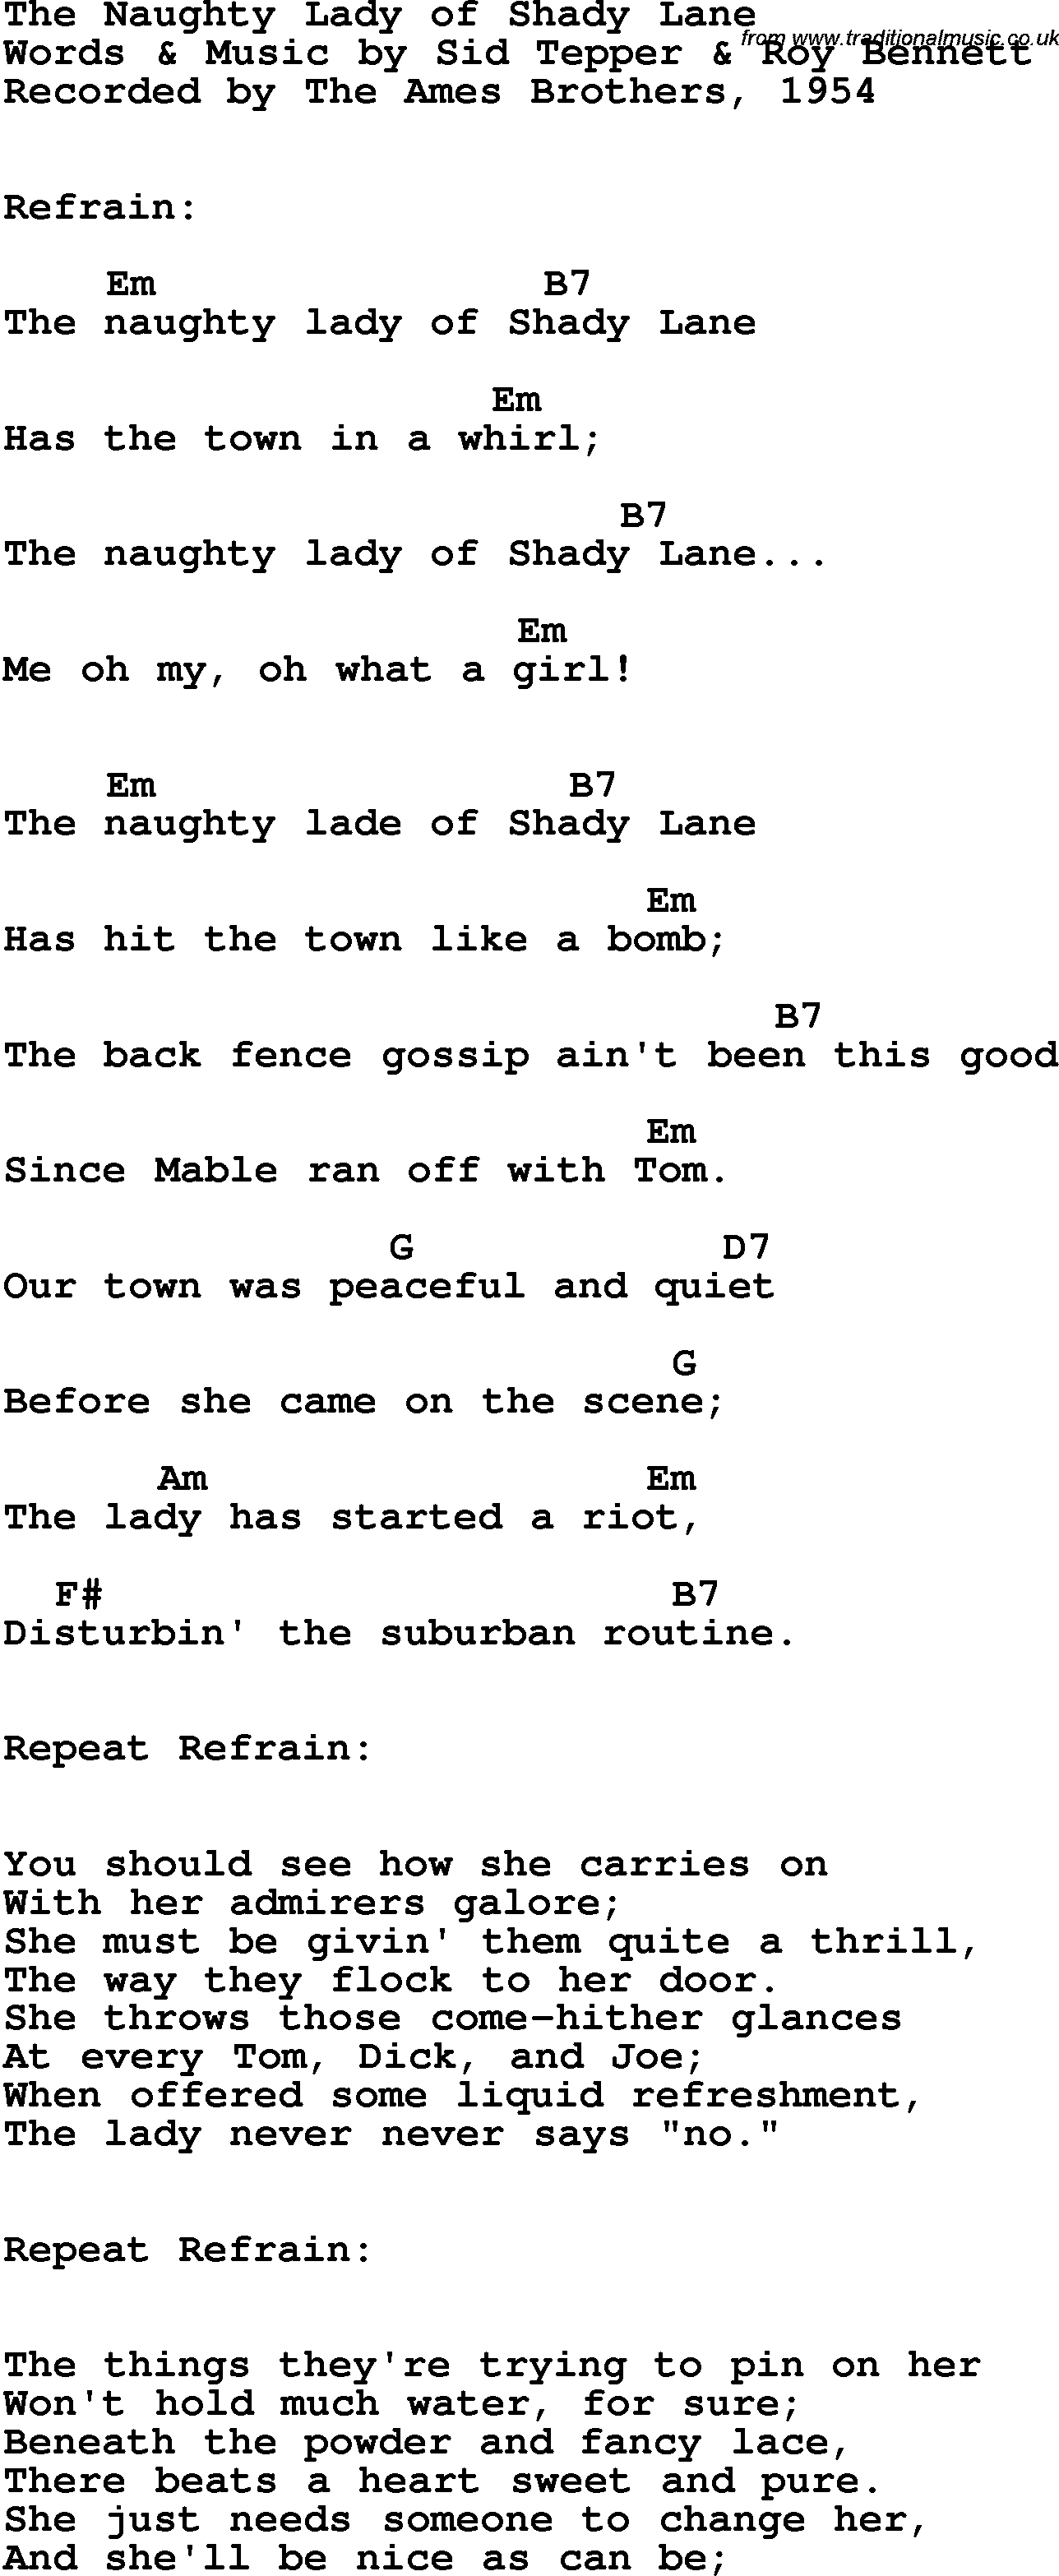 Song Lyrics with guitar chords for Naughty Lady Of Shady Lane, The - The Ames Brothers, 1954